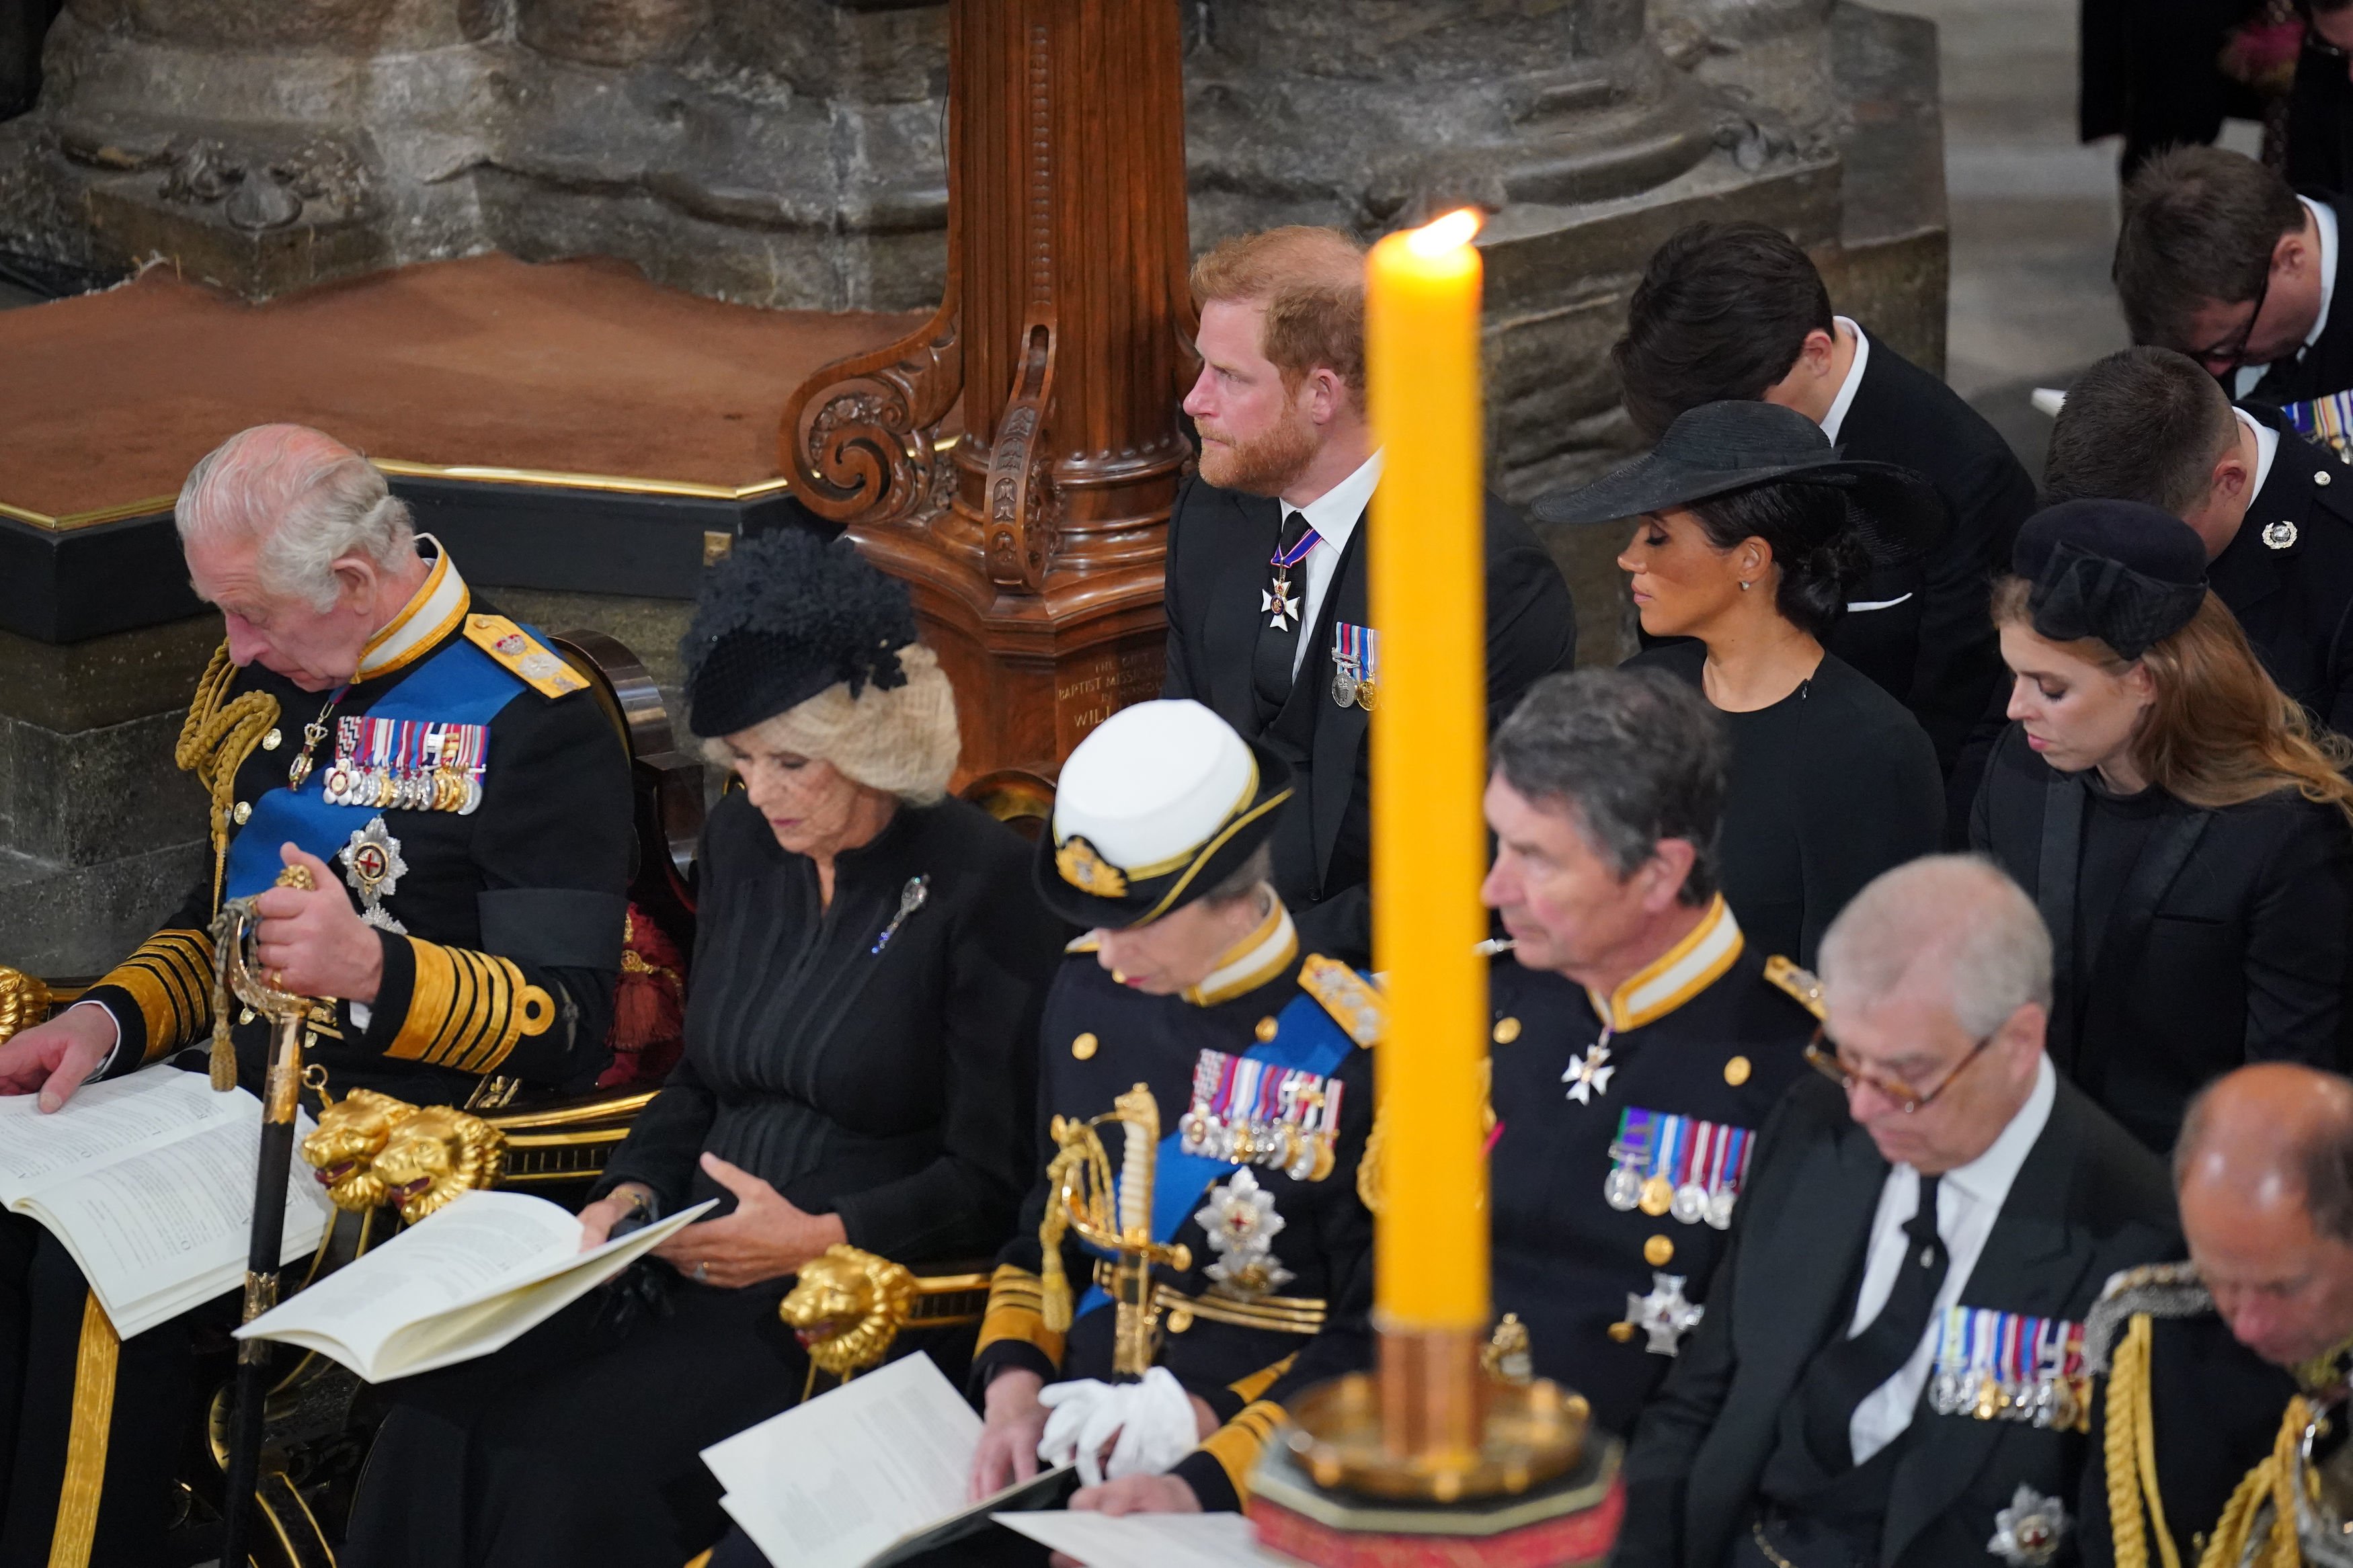 King Charles III, Camilla, Queen Consort, Princess Anne, Princess Royal, Prince Harry, Duke of Sussex, and Meghan, Duchess of Sussex, during the State Funeral of Queen Elizabeth II at Westminster Abbey on September 19, 2022, in London, England. | Source: Getty Images